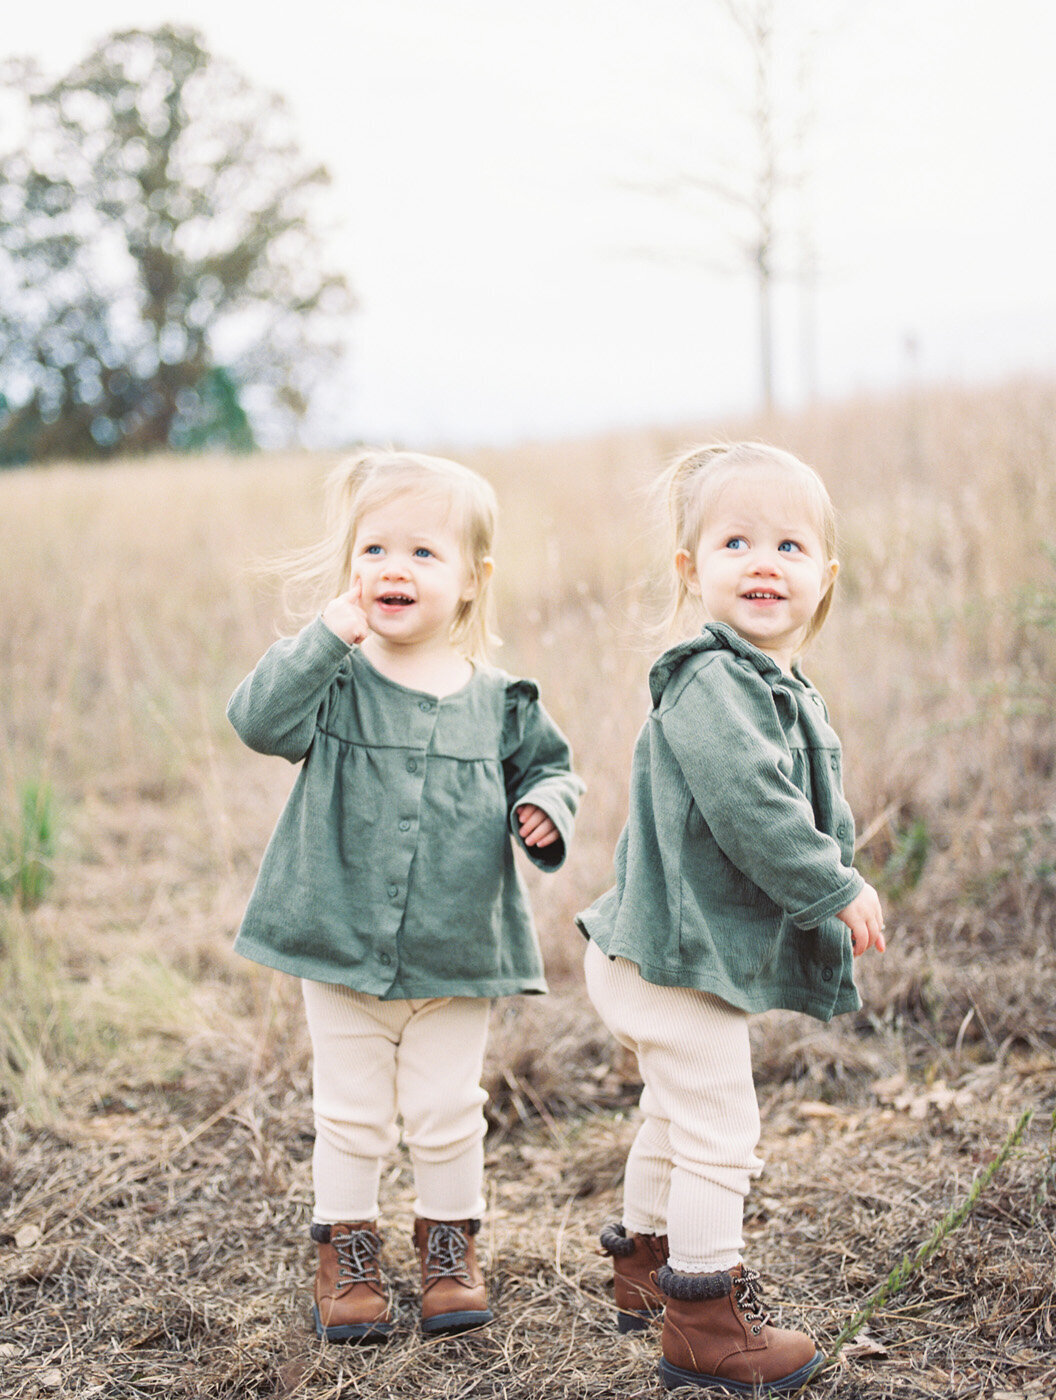 Raleigh Family Photographer | Jessica Agee Photography - 034